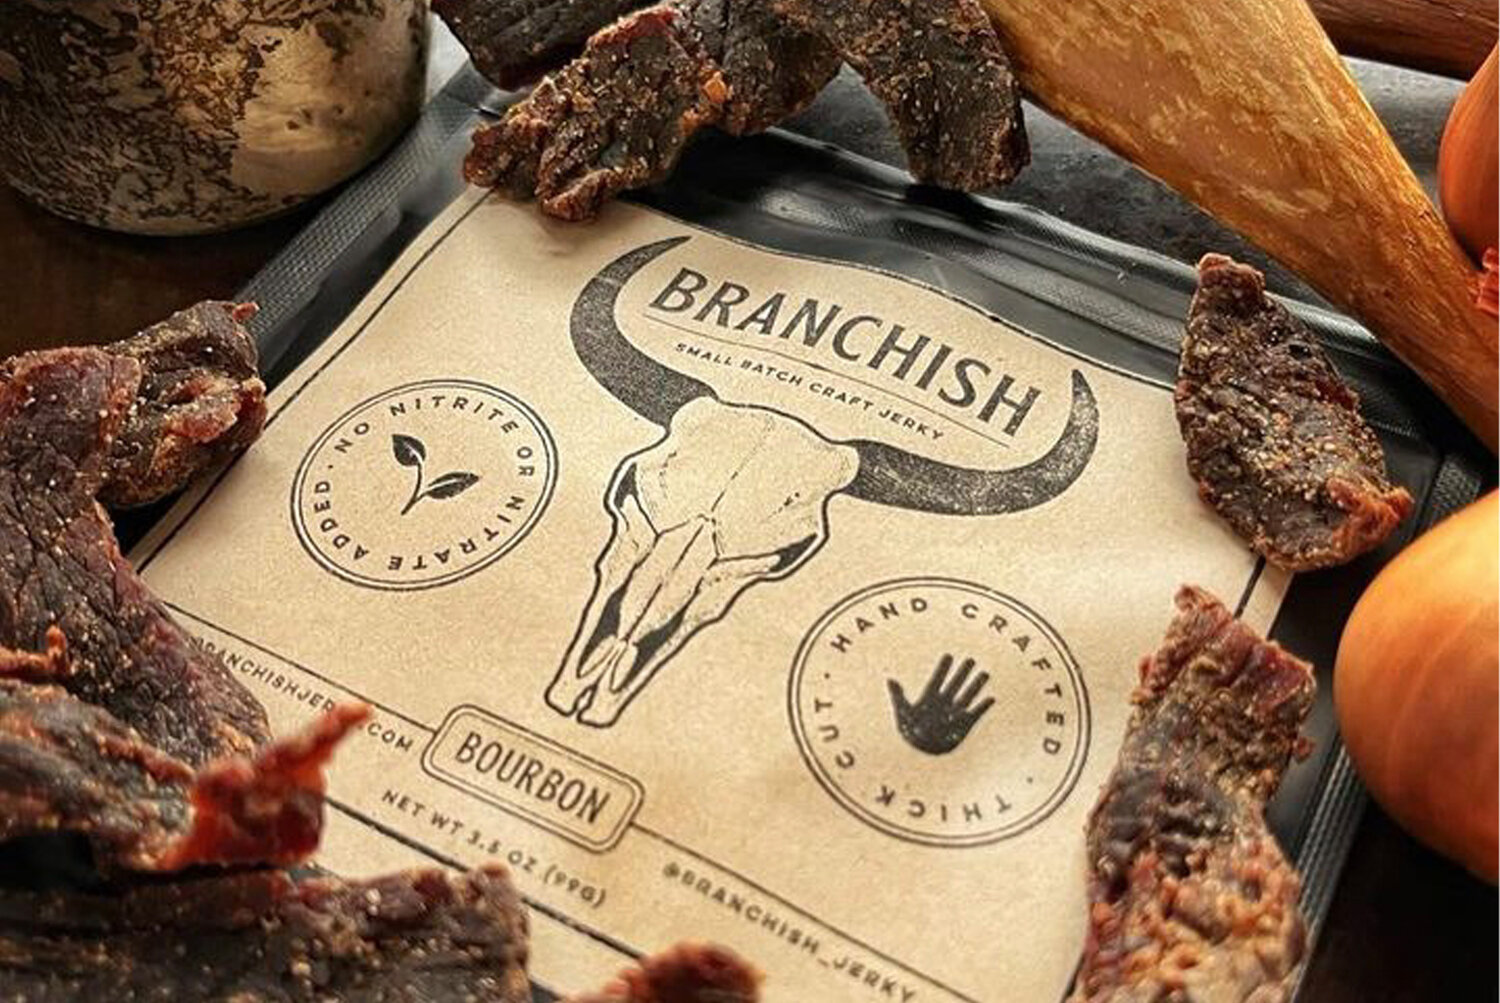 Thick-cut jerky from Branchish comes in a range of flavors